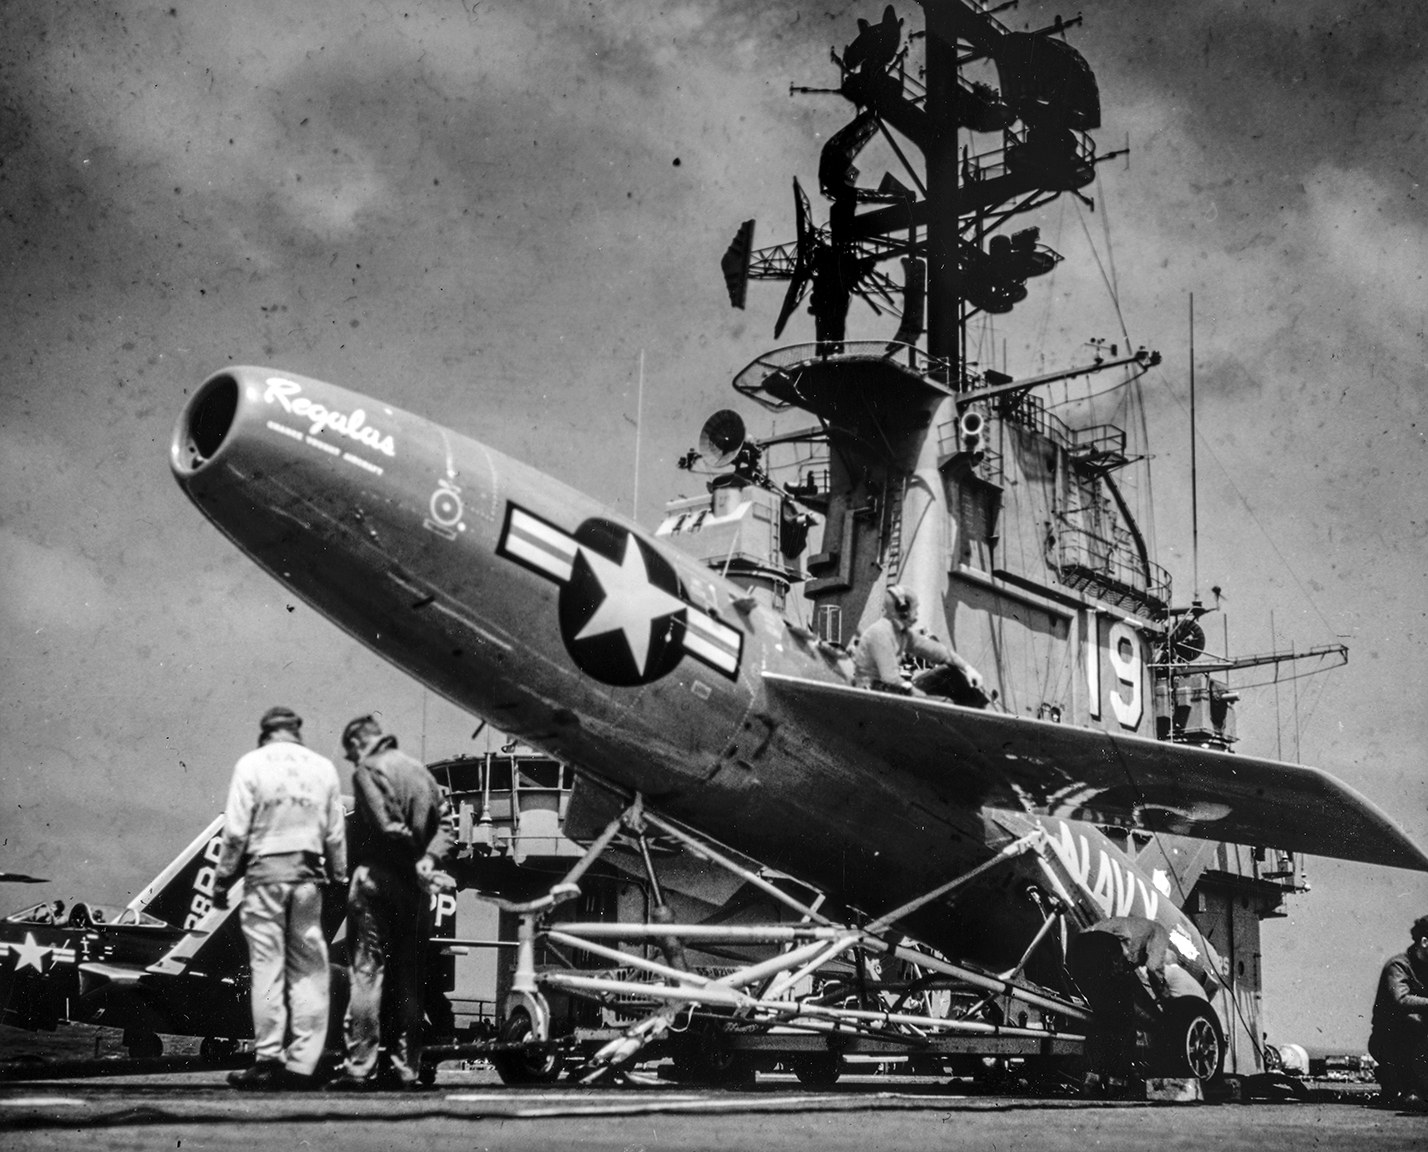 An SSM-N-8 Regulus I missile is poised and ready to be launched aboard the USS Hancock (CV-19).